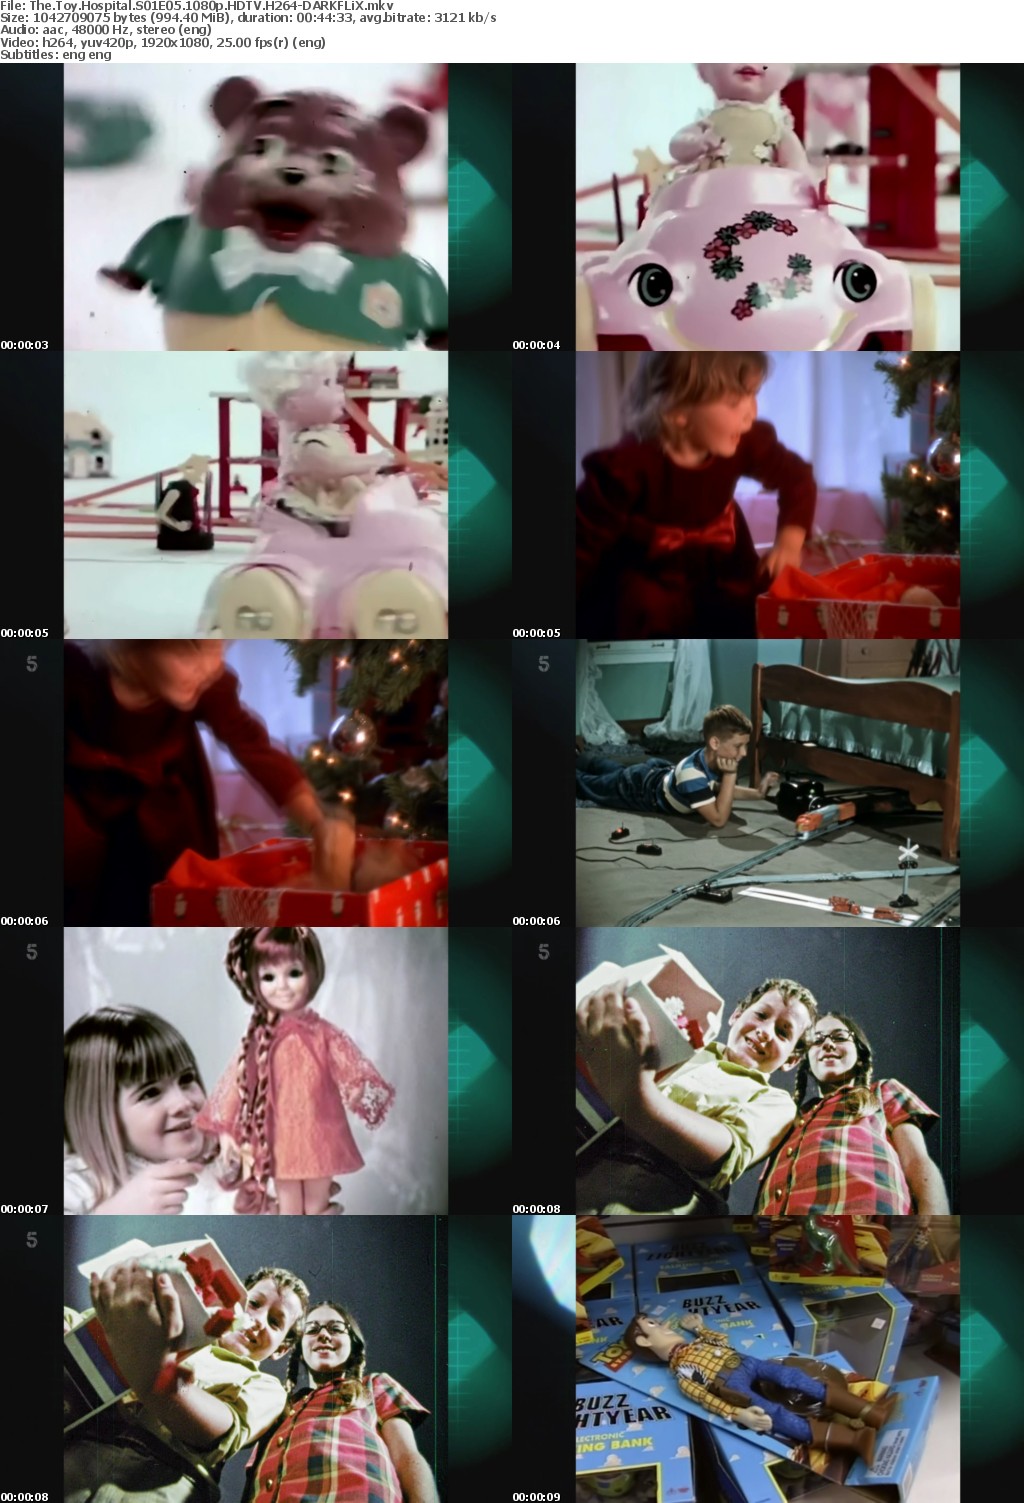 The Toy Hospital S01E05 1080p HDTV H264-DARKFLiX